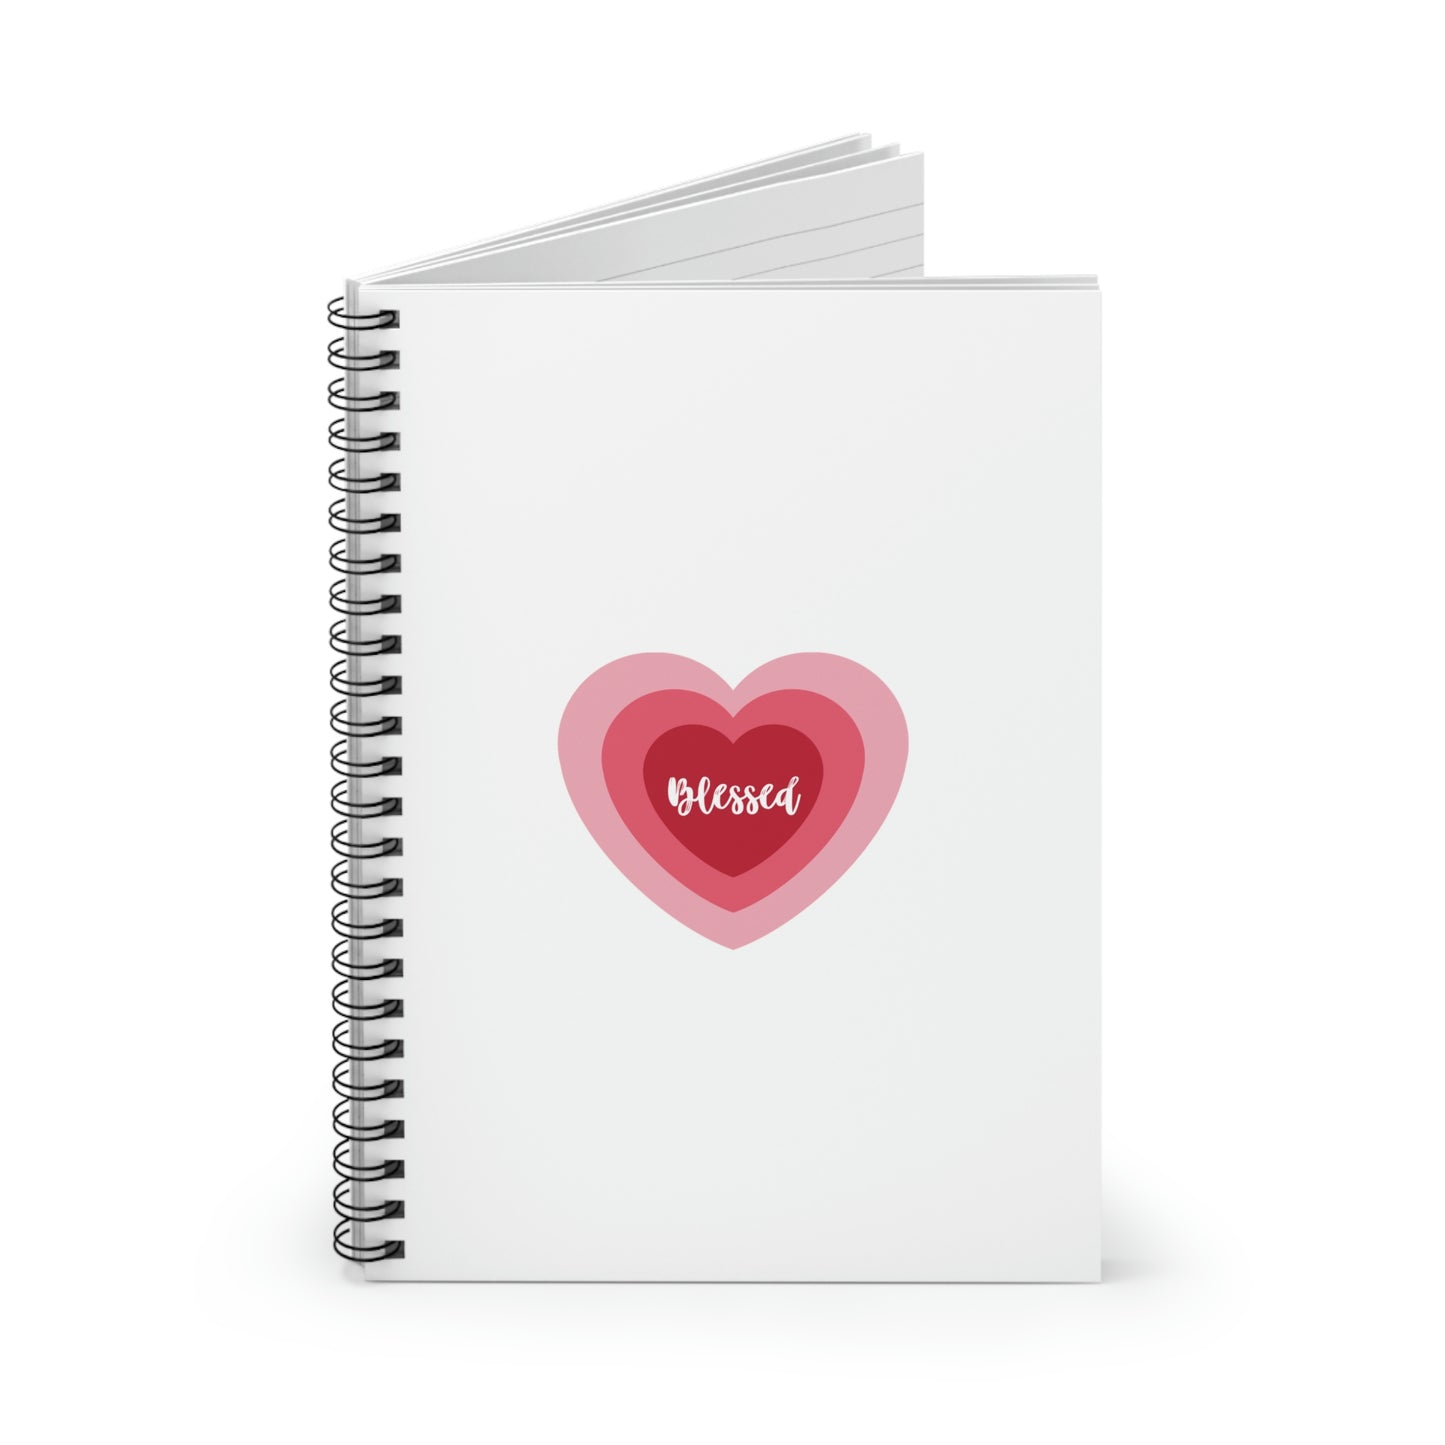 Blessed Heart - Spiral Notebook - Ruled Line